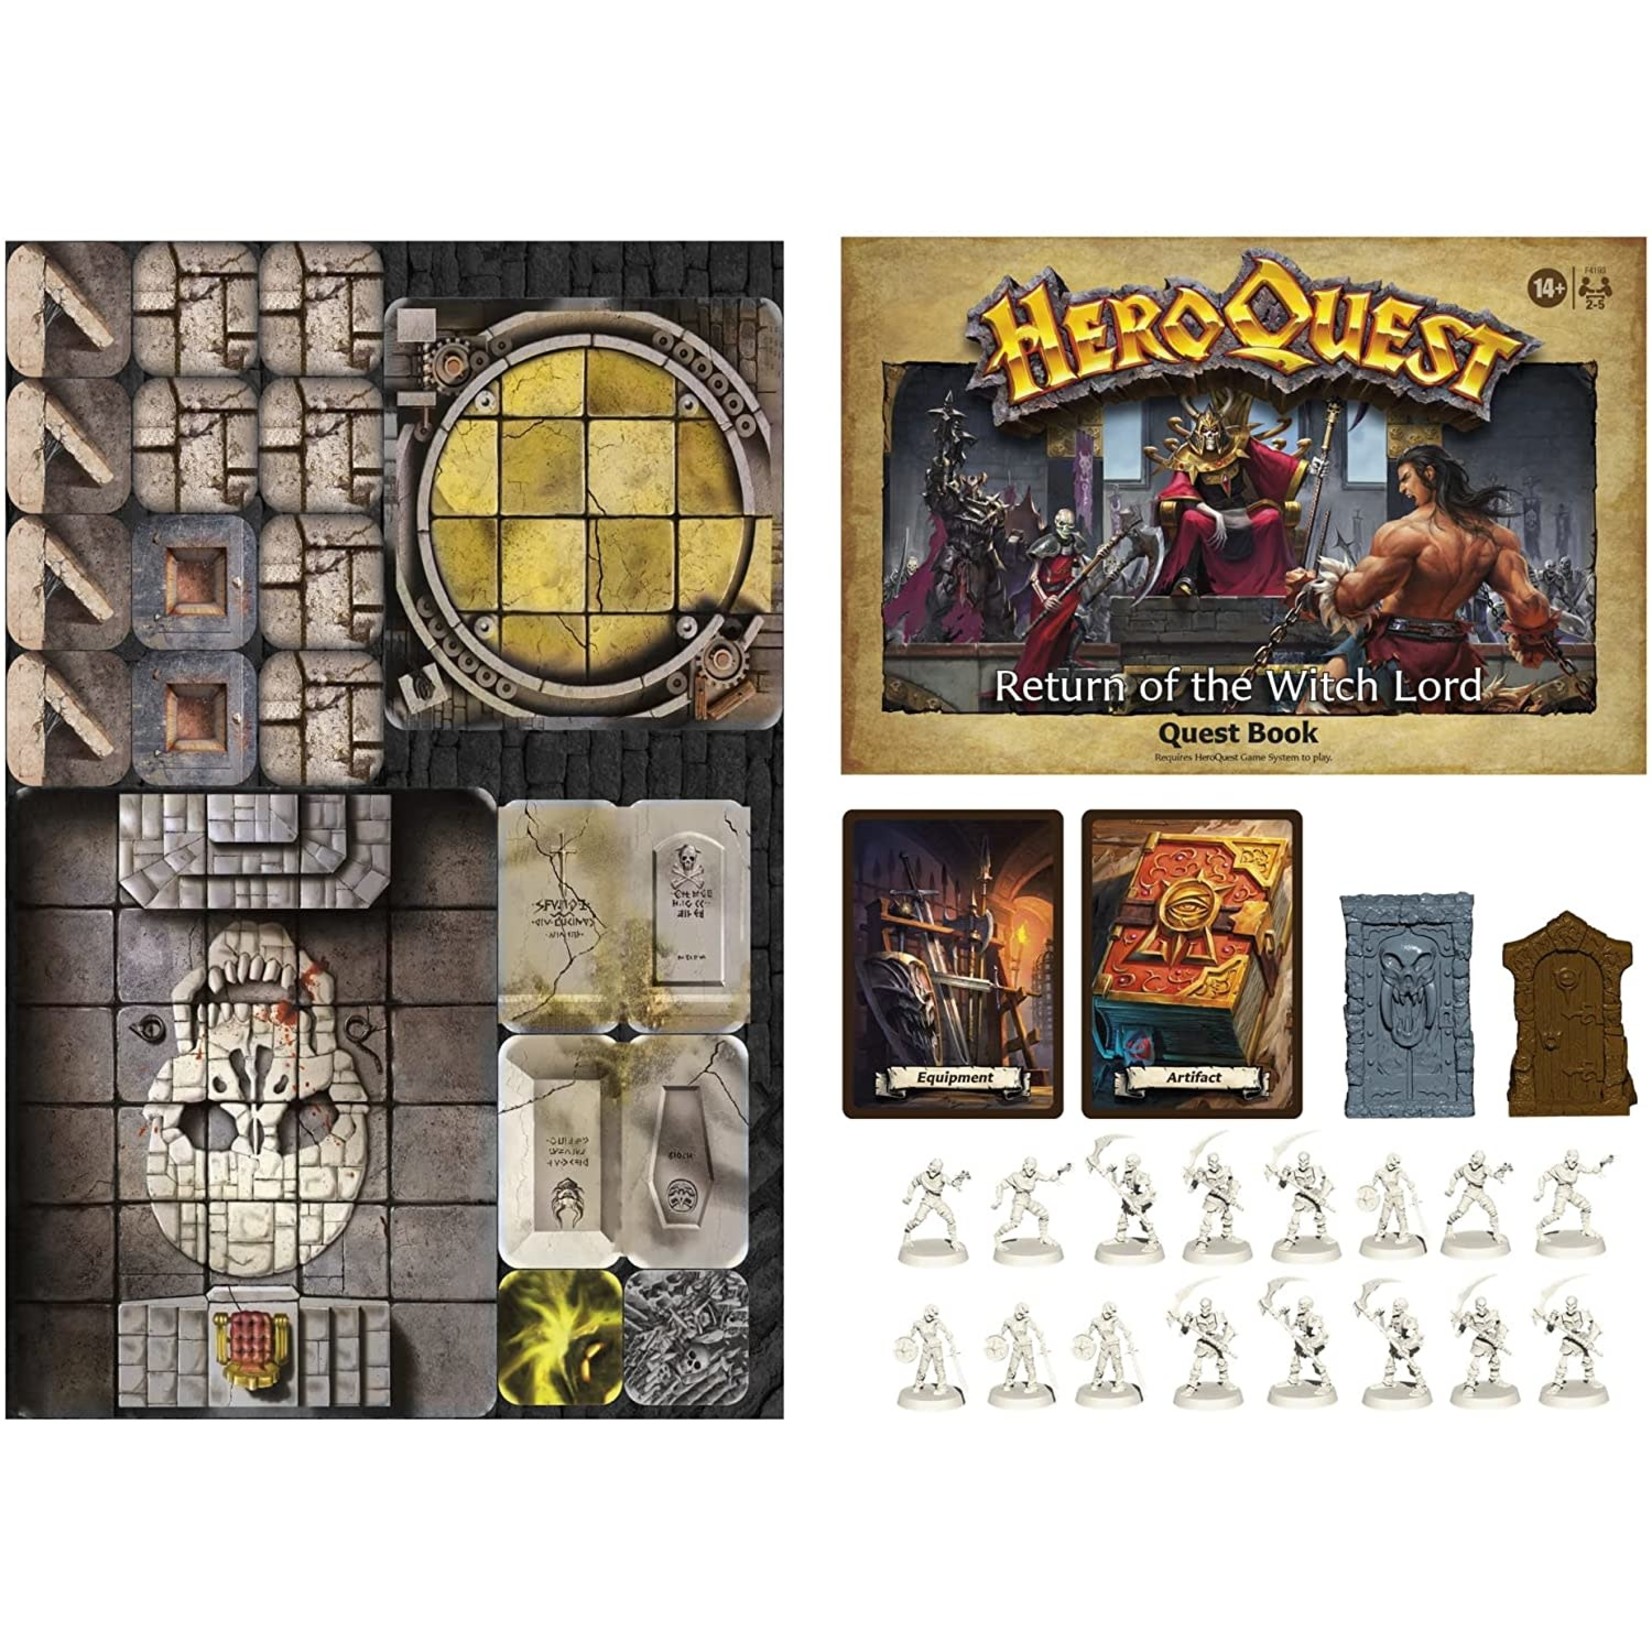 HeroQuest: Return of the Witch Lord Quest Pack